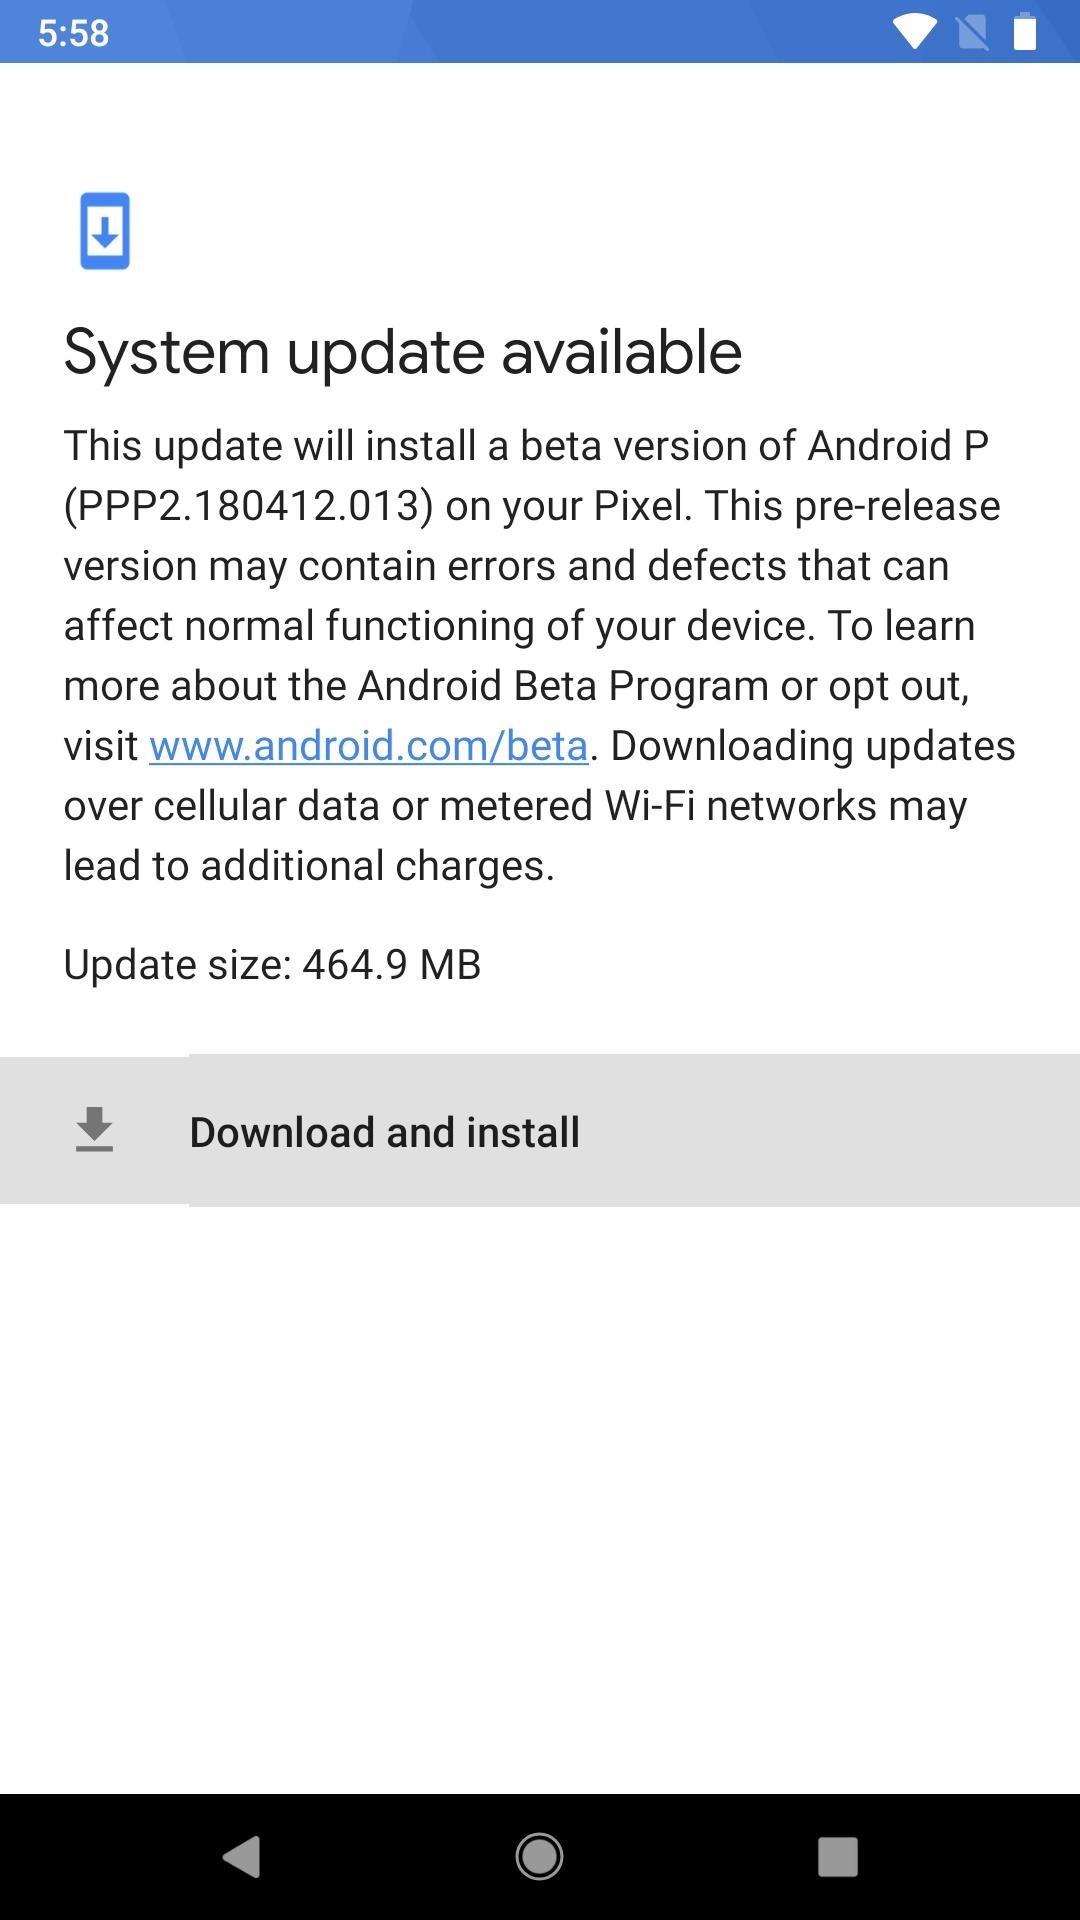 How to Install Android 9.0 Pie Beta on Your Google Pixel or Pixel 2 Right Now